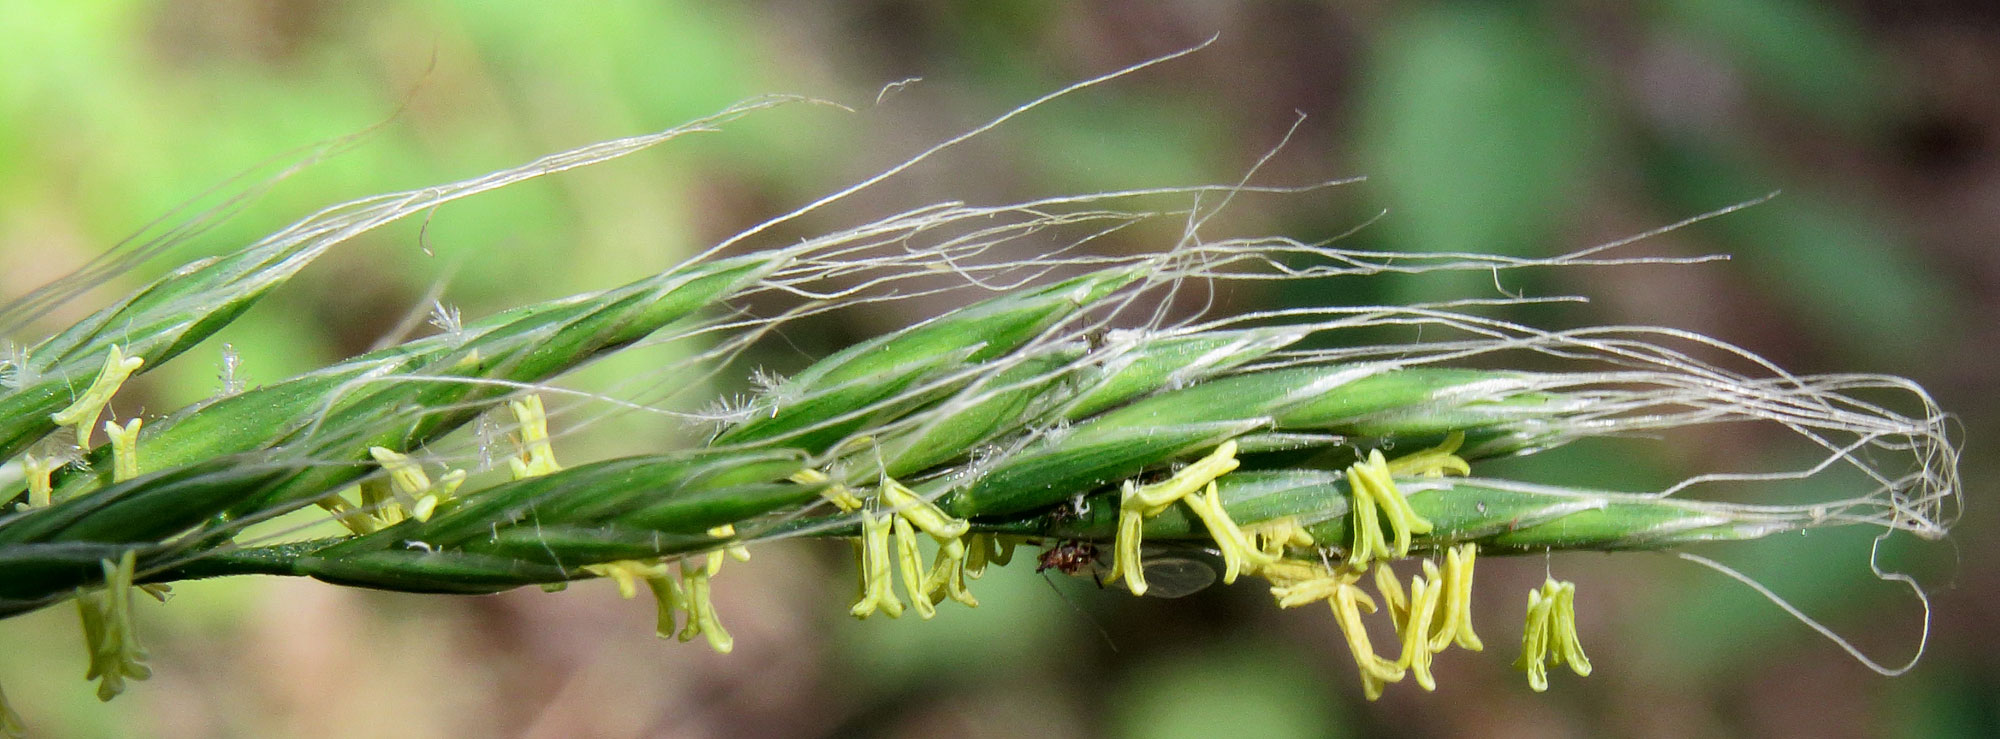 Photograph of part of an inflorescence of giant fescue. The photograph shows a branch of an inflorescence oriented horizontally. The inflorescence has sparse long white hairs or thin awns extending from it. Yellow anthers dangle from the inflorescence.